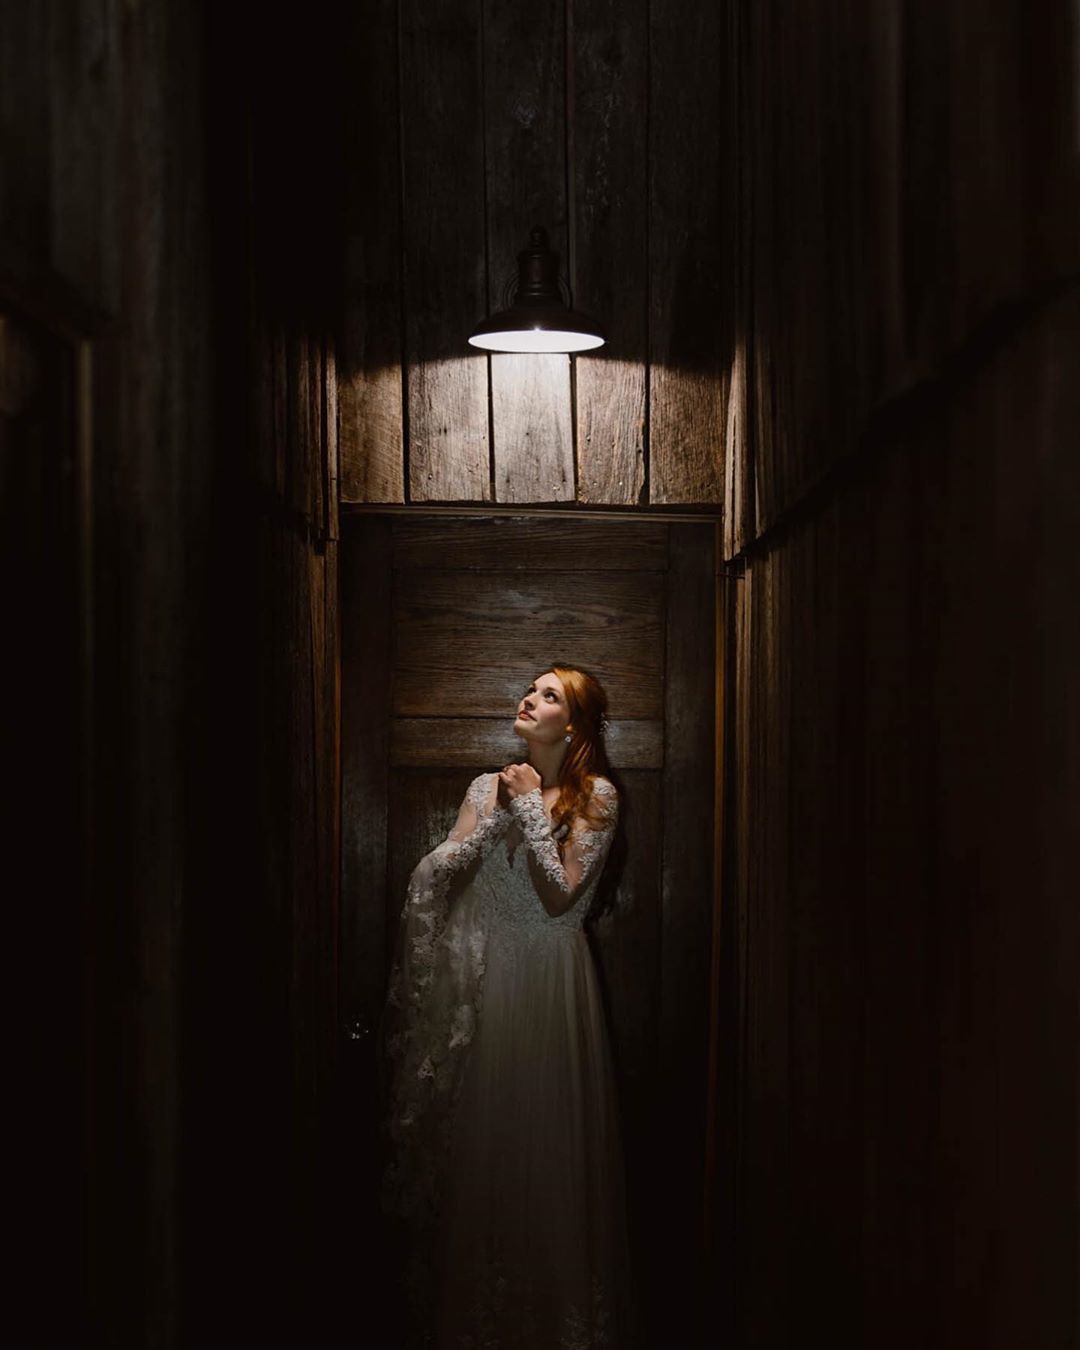 A bride standing in front of a dark doorway with a lit lamp at the top